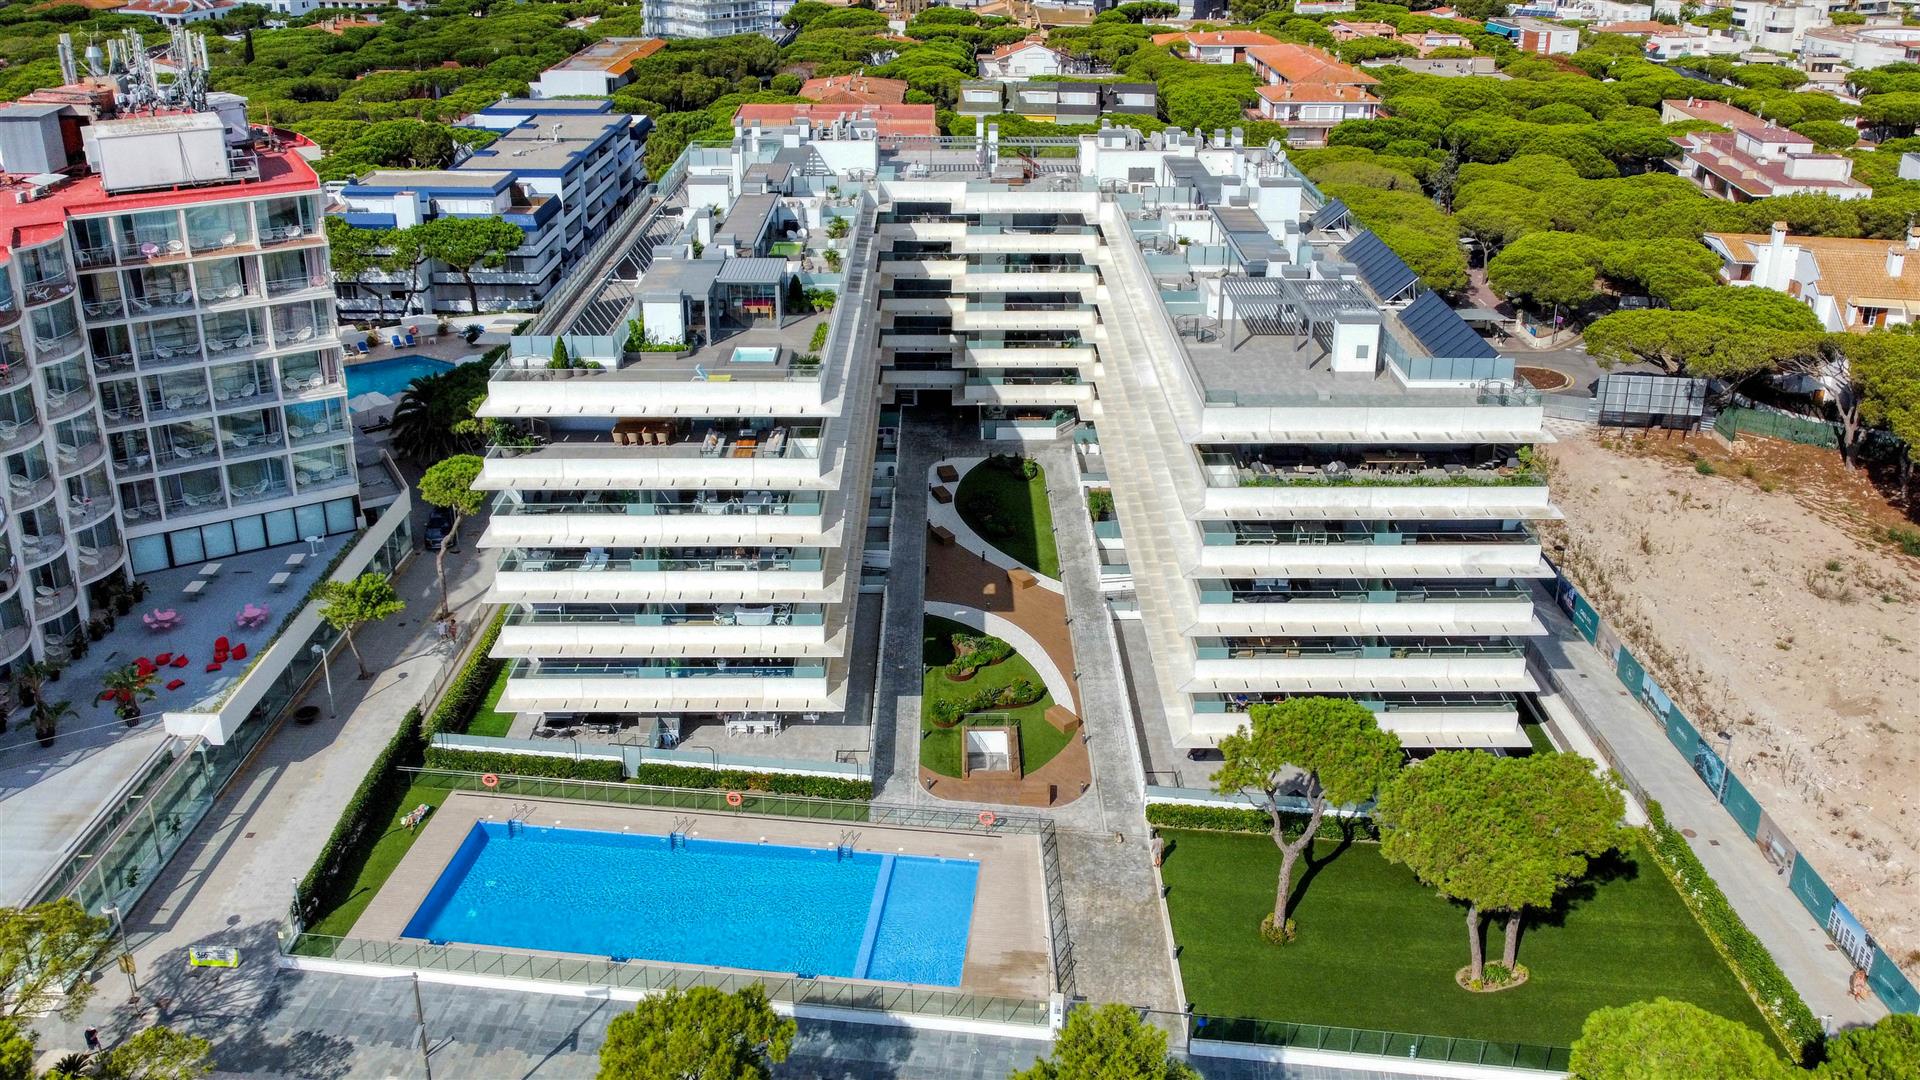 Spectacular new build building located on the seafront of Playa de Aro and a few steps away 